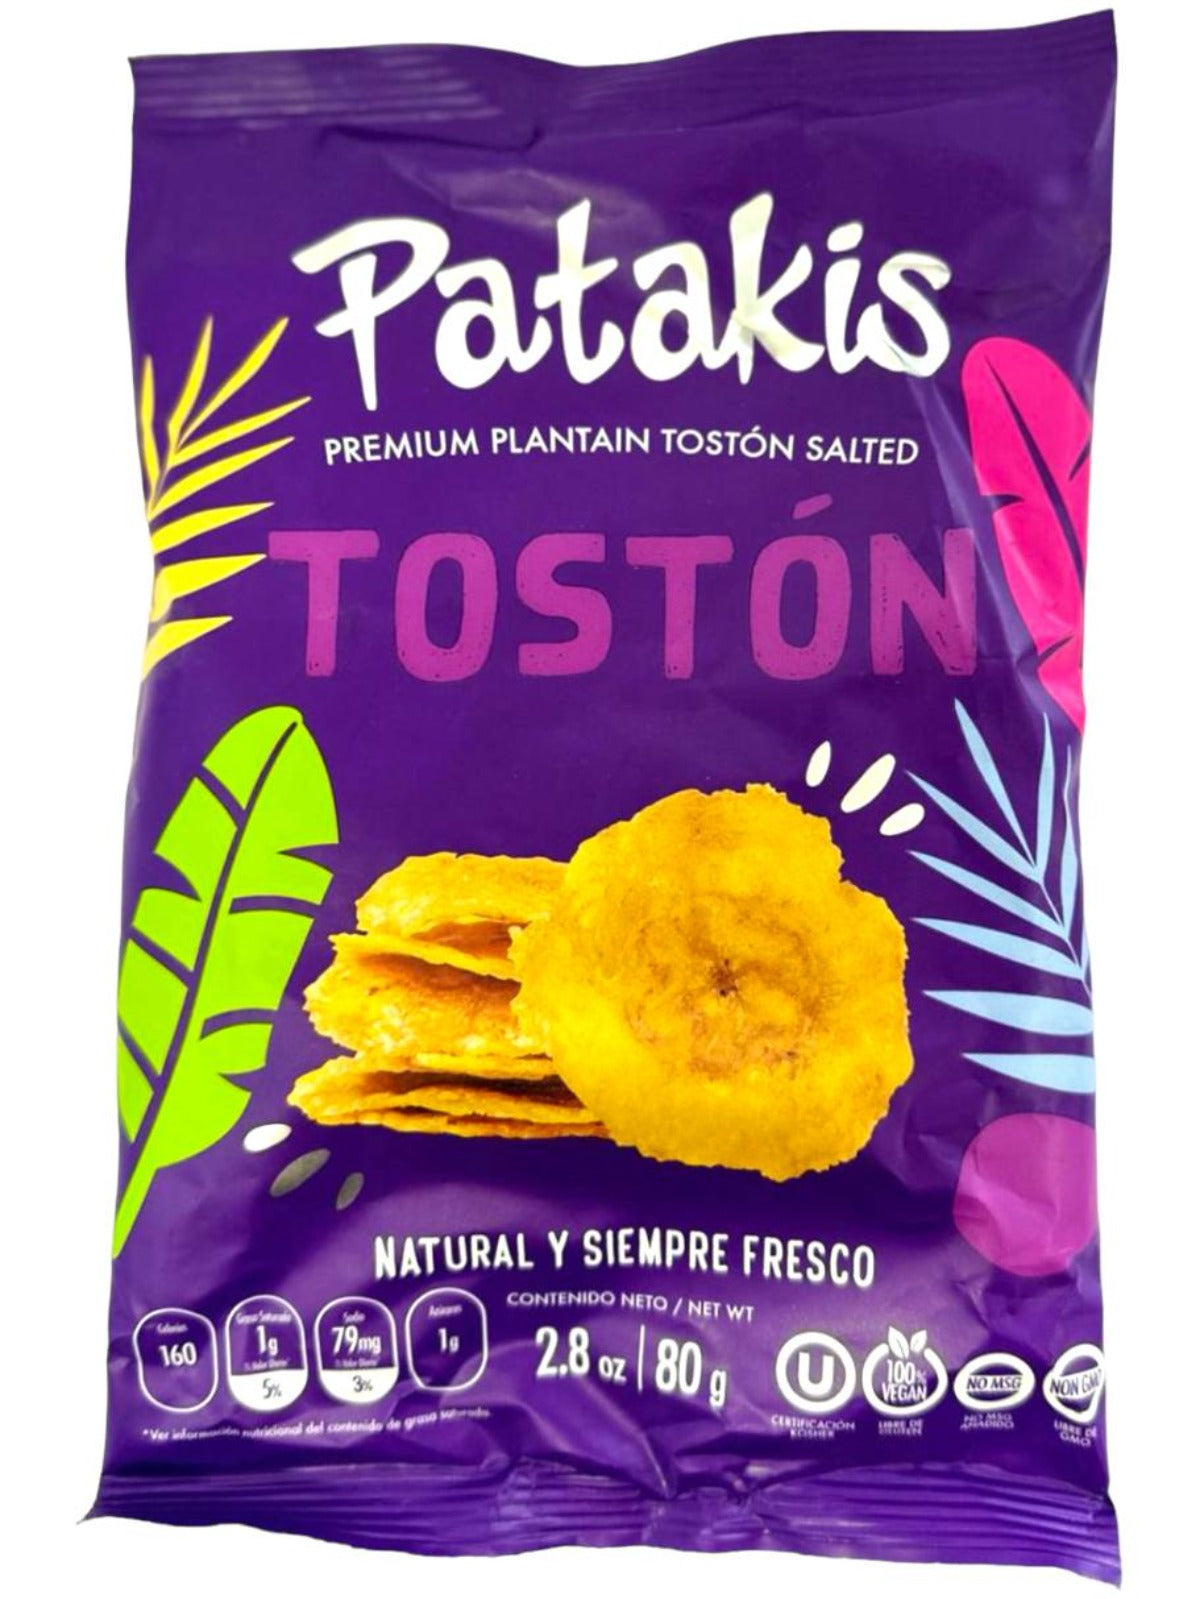 Patakis Toston Premium Plantain Toston Colombian Chips Salted 80g - 4 Pack Total 320g Best Before End Of March 2024